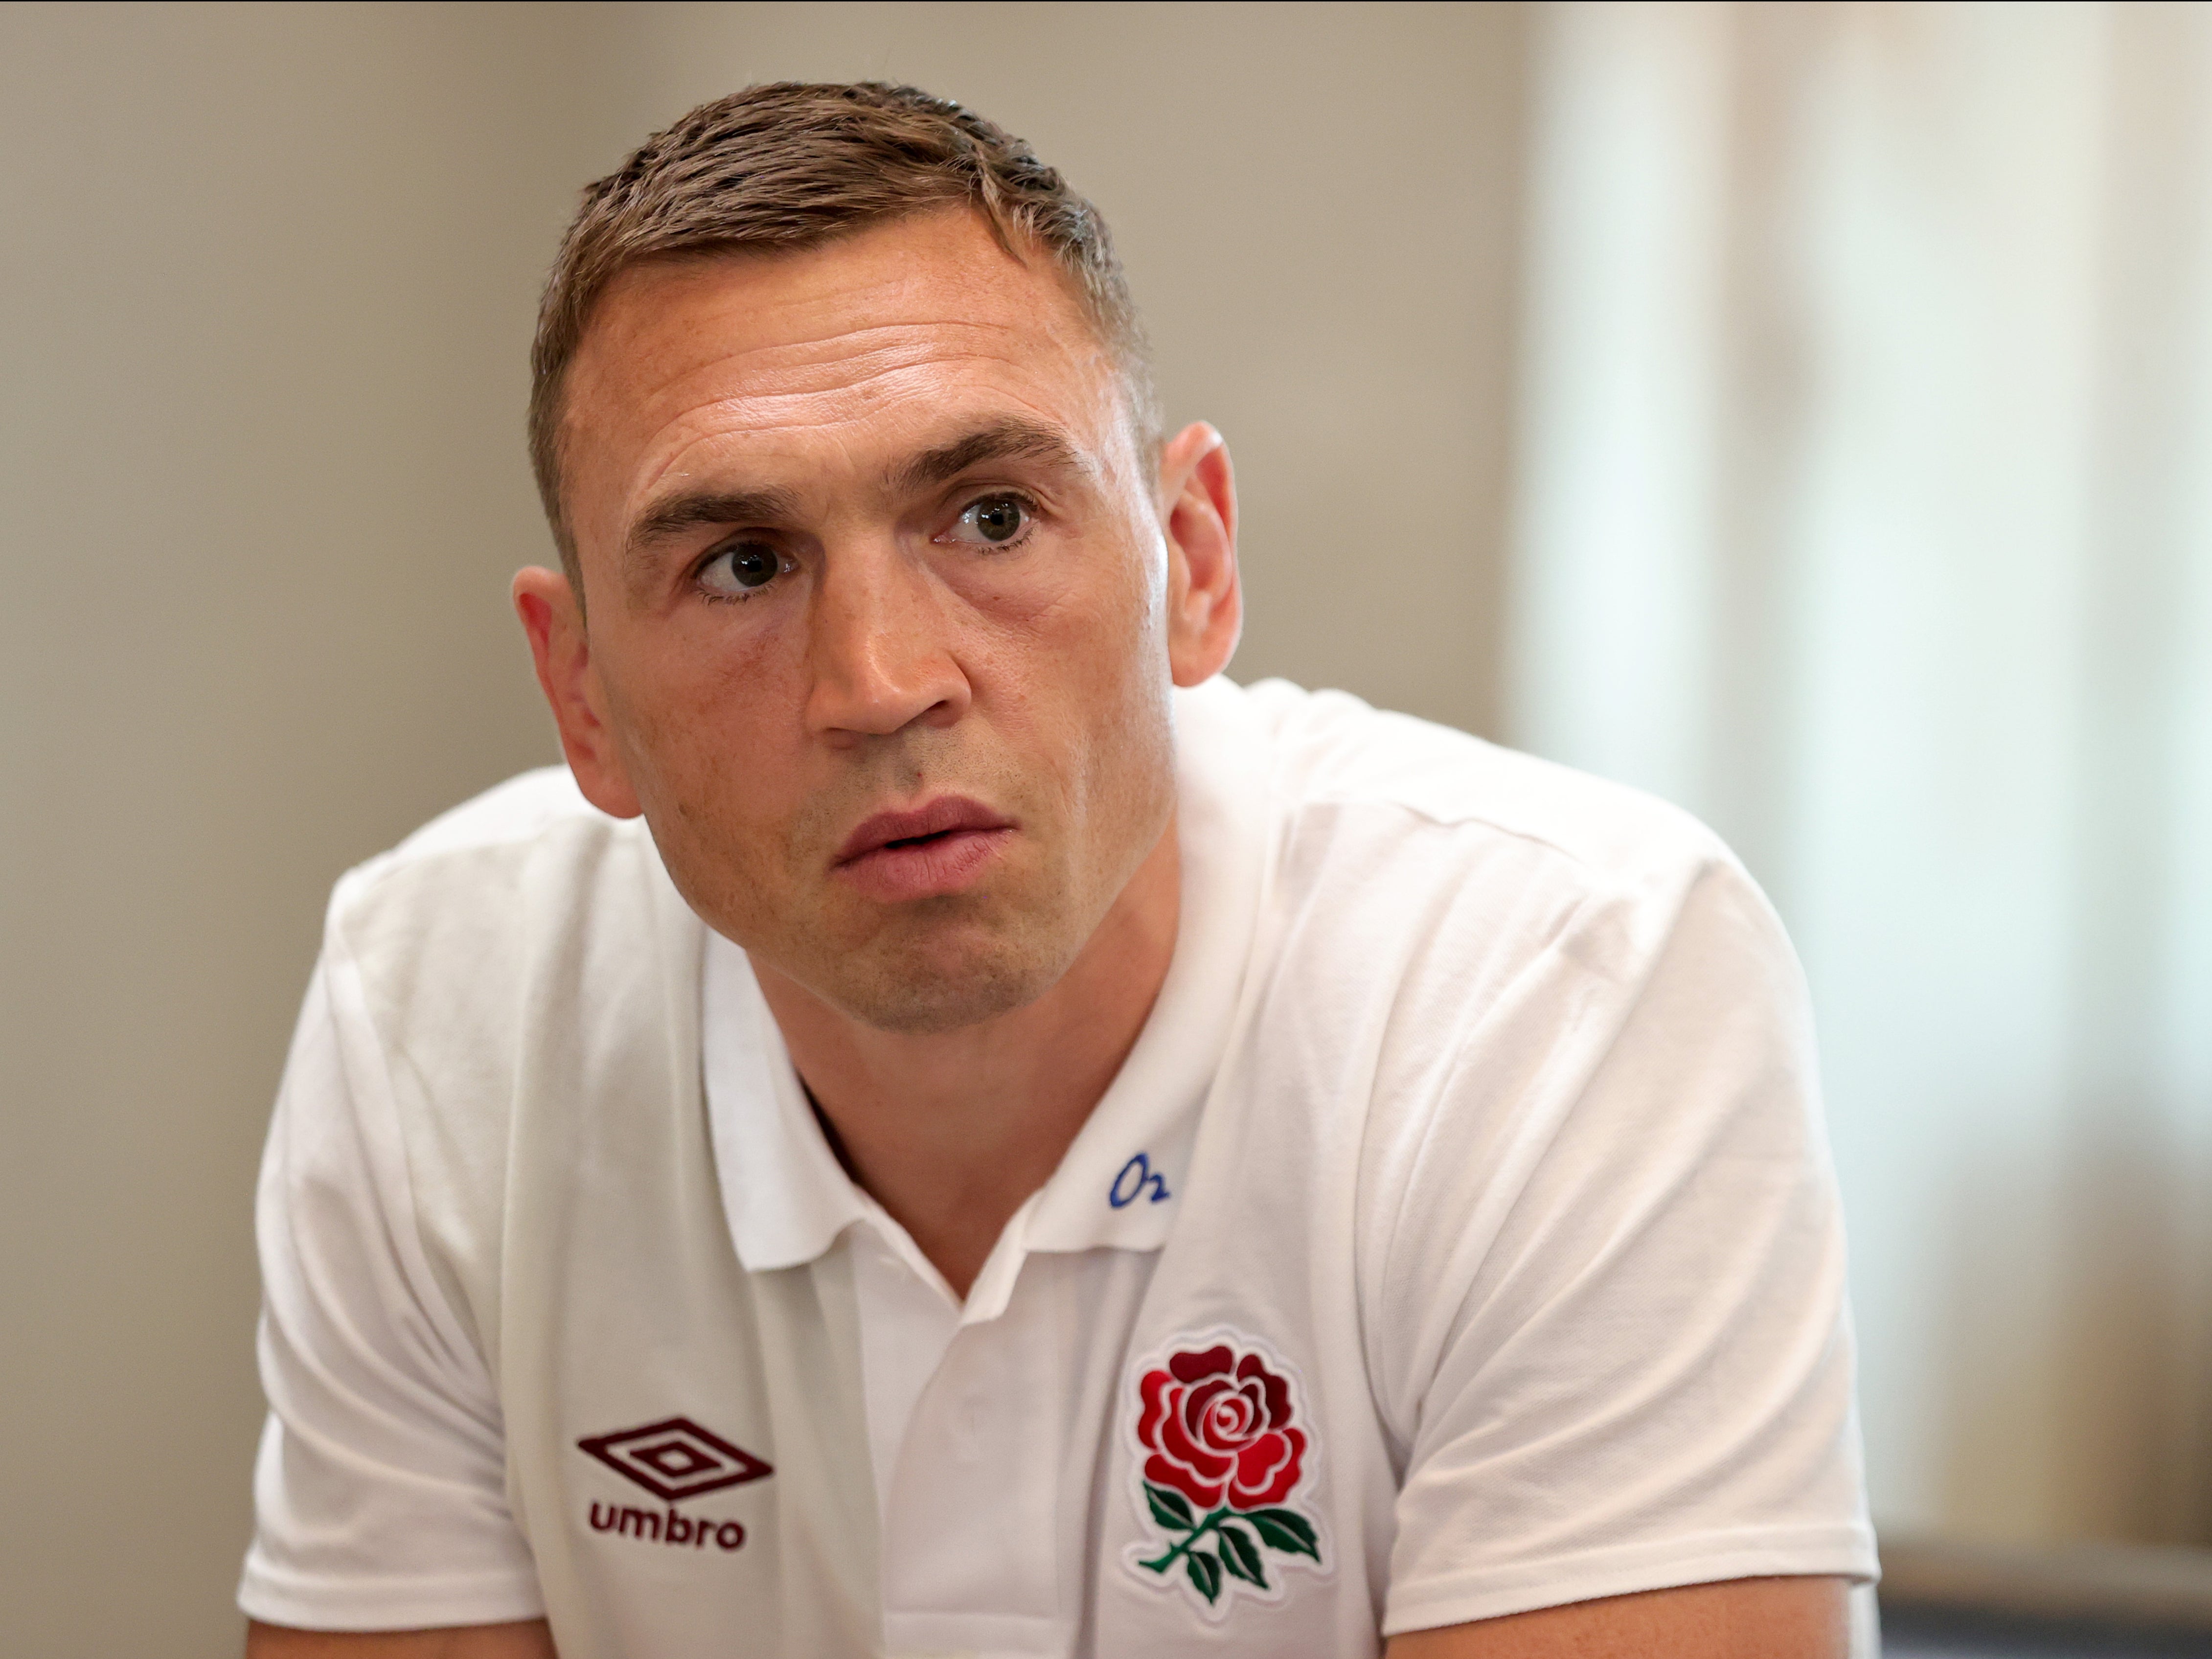 Kevin Sinfield was appointed as England’s defence coach in December of last year